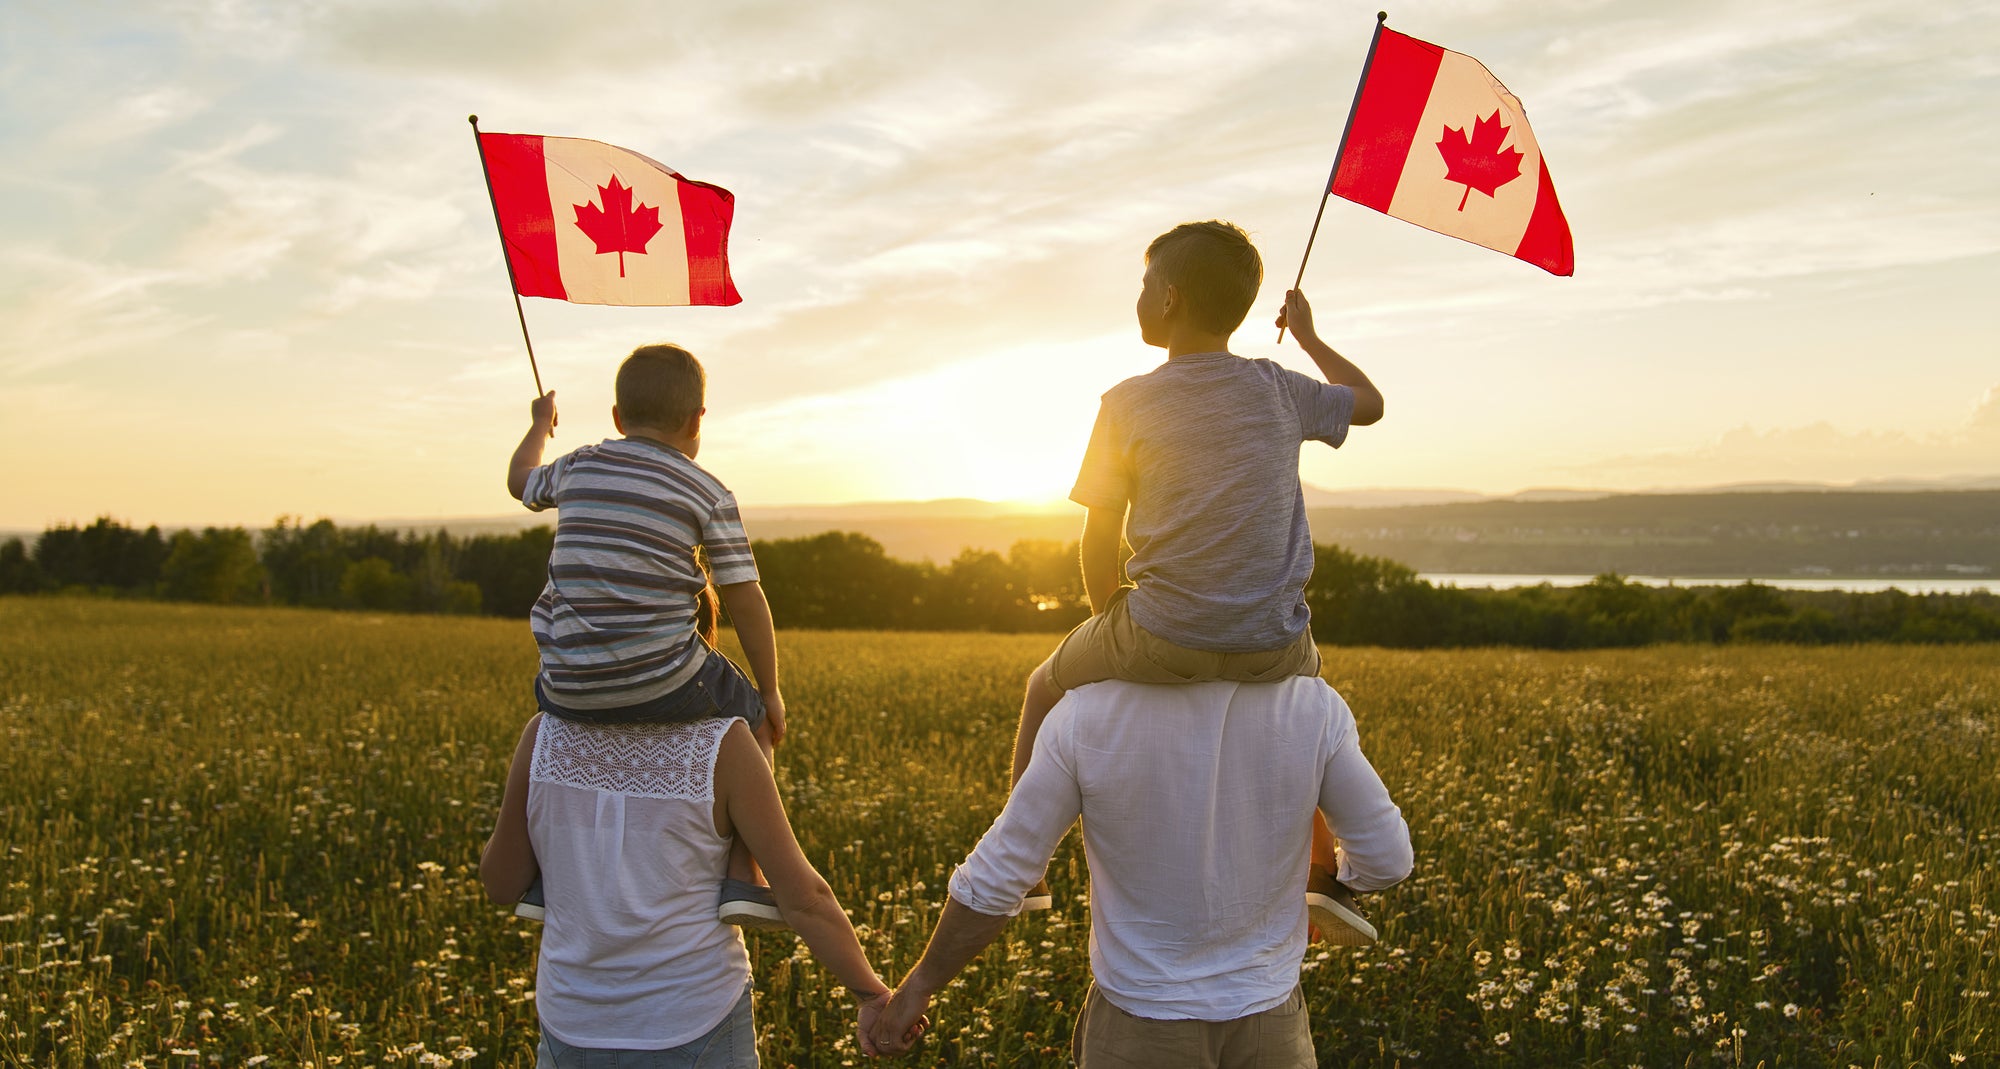 FlagMart Canada is a family owned business